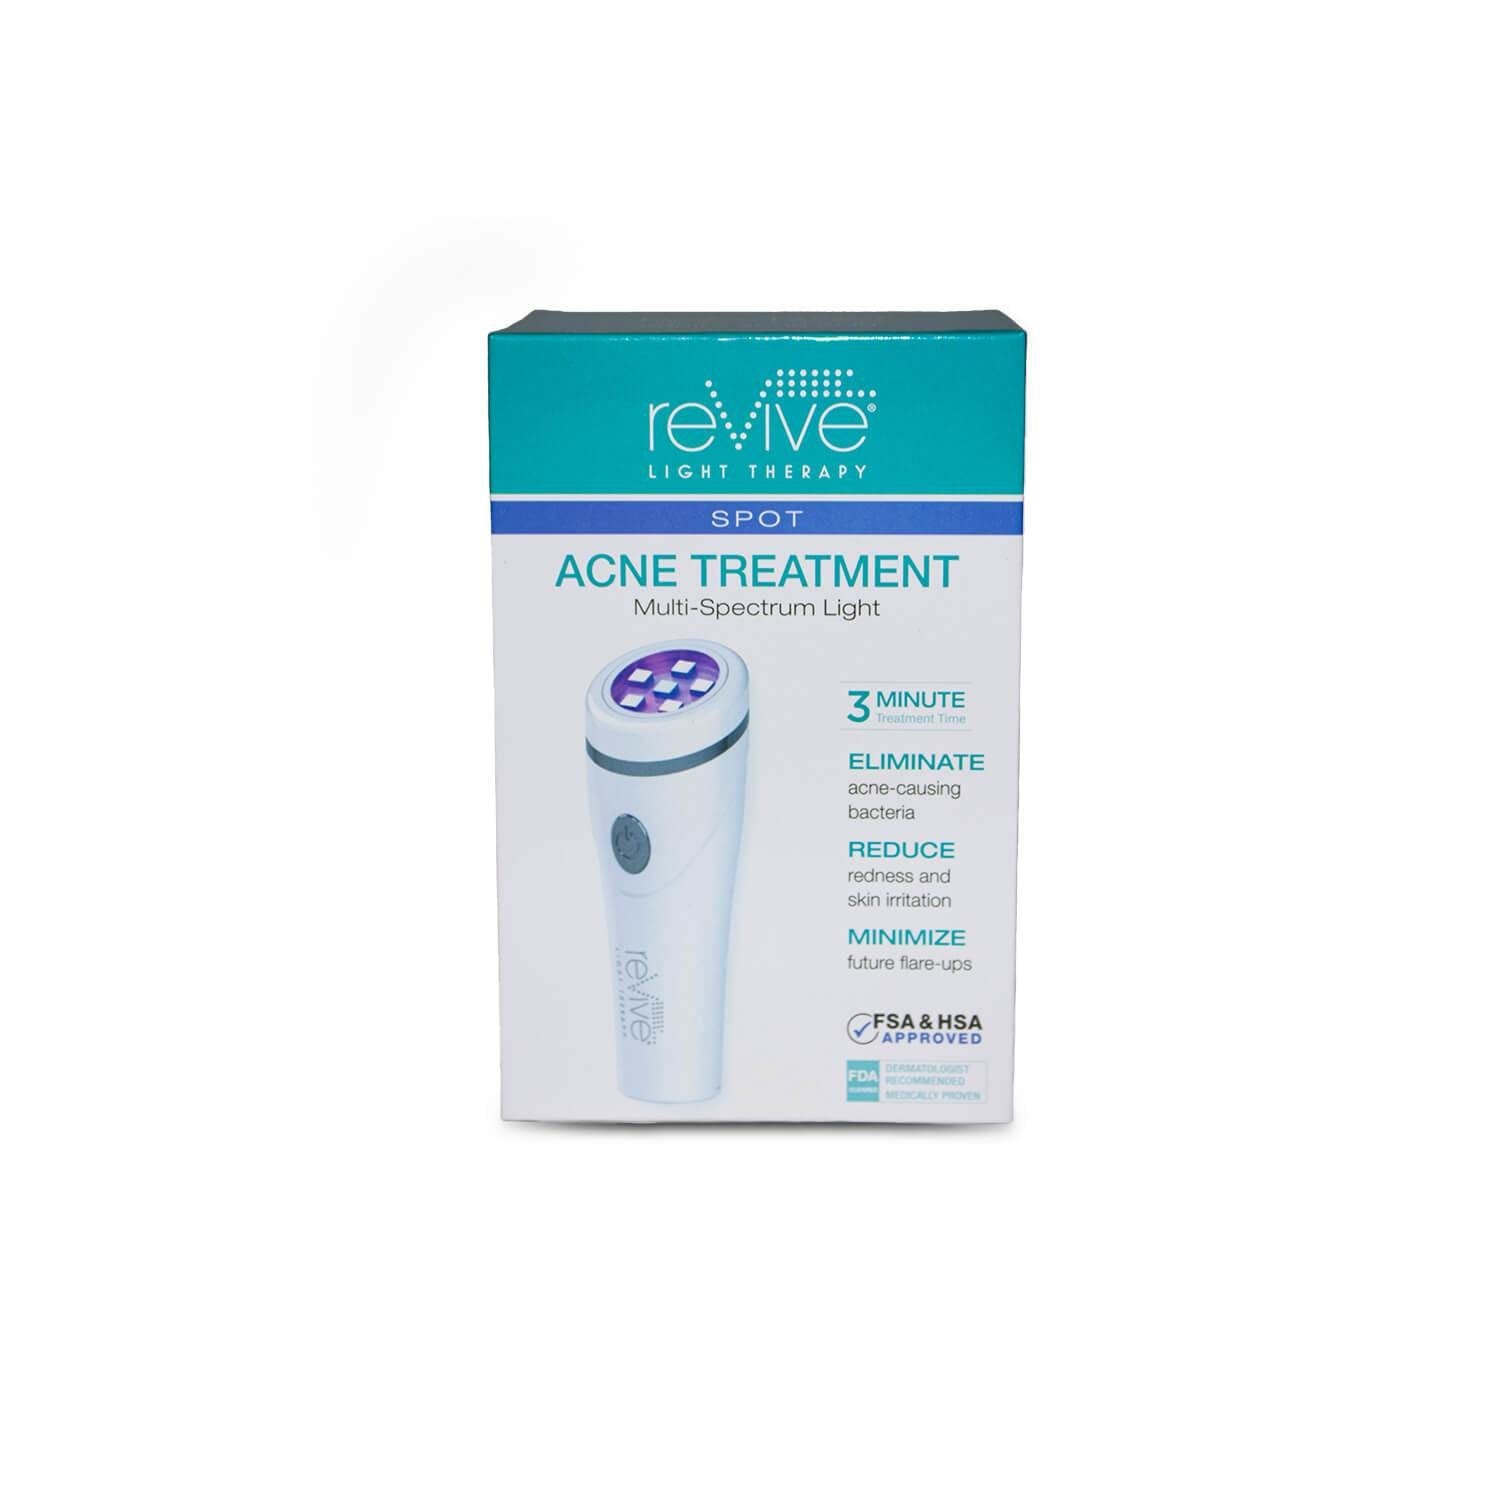 reVive Light Therapy® Spot— Light Therapy for Acne Treatment - Carex Health Brands